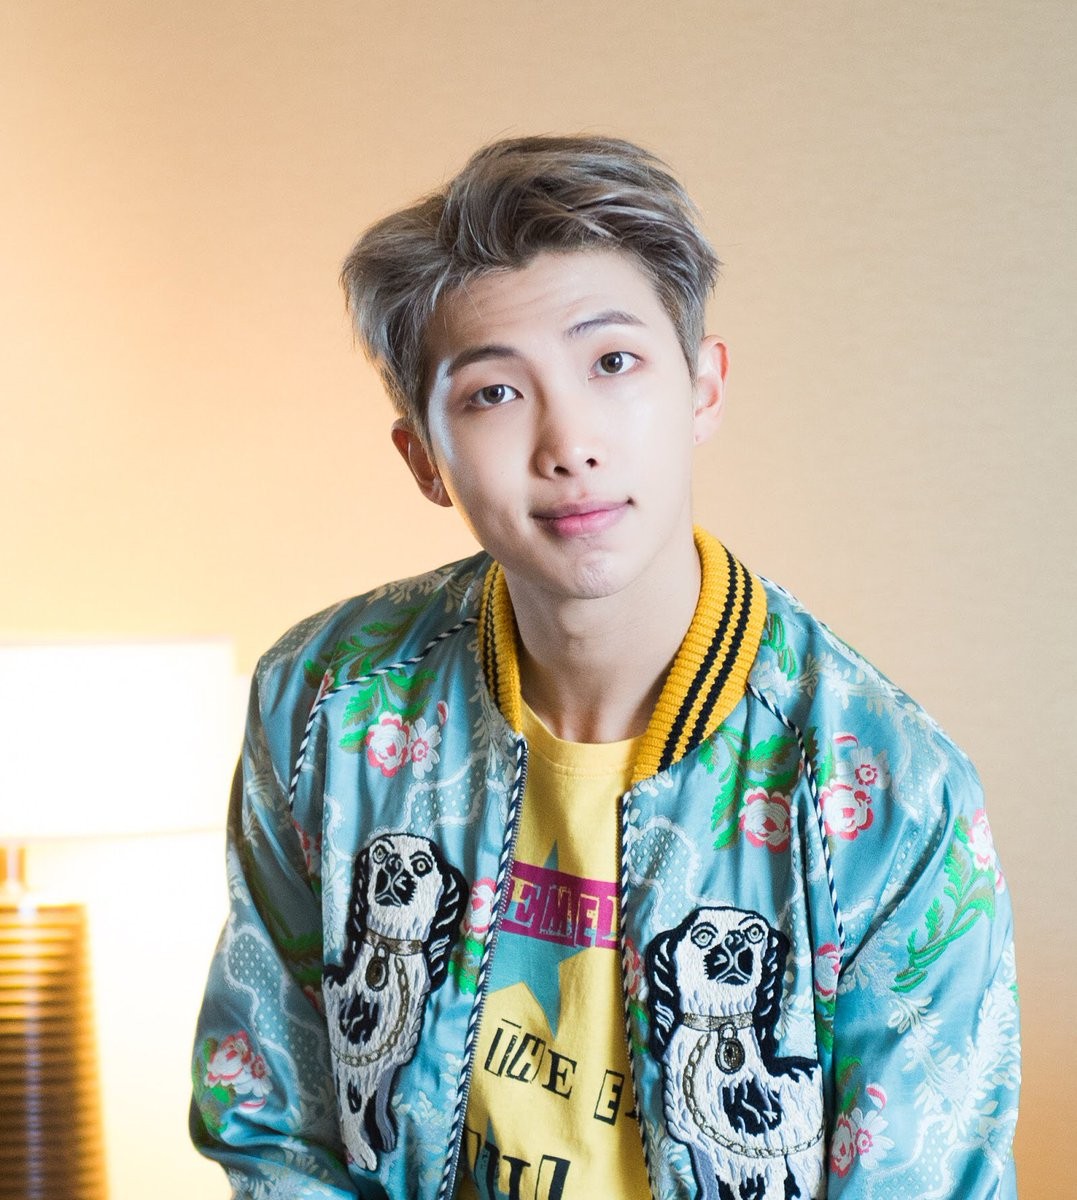 RM from BTS has officially released seven new solo numbers.